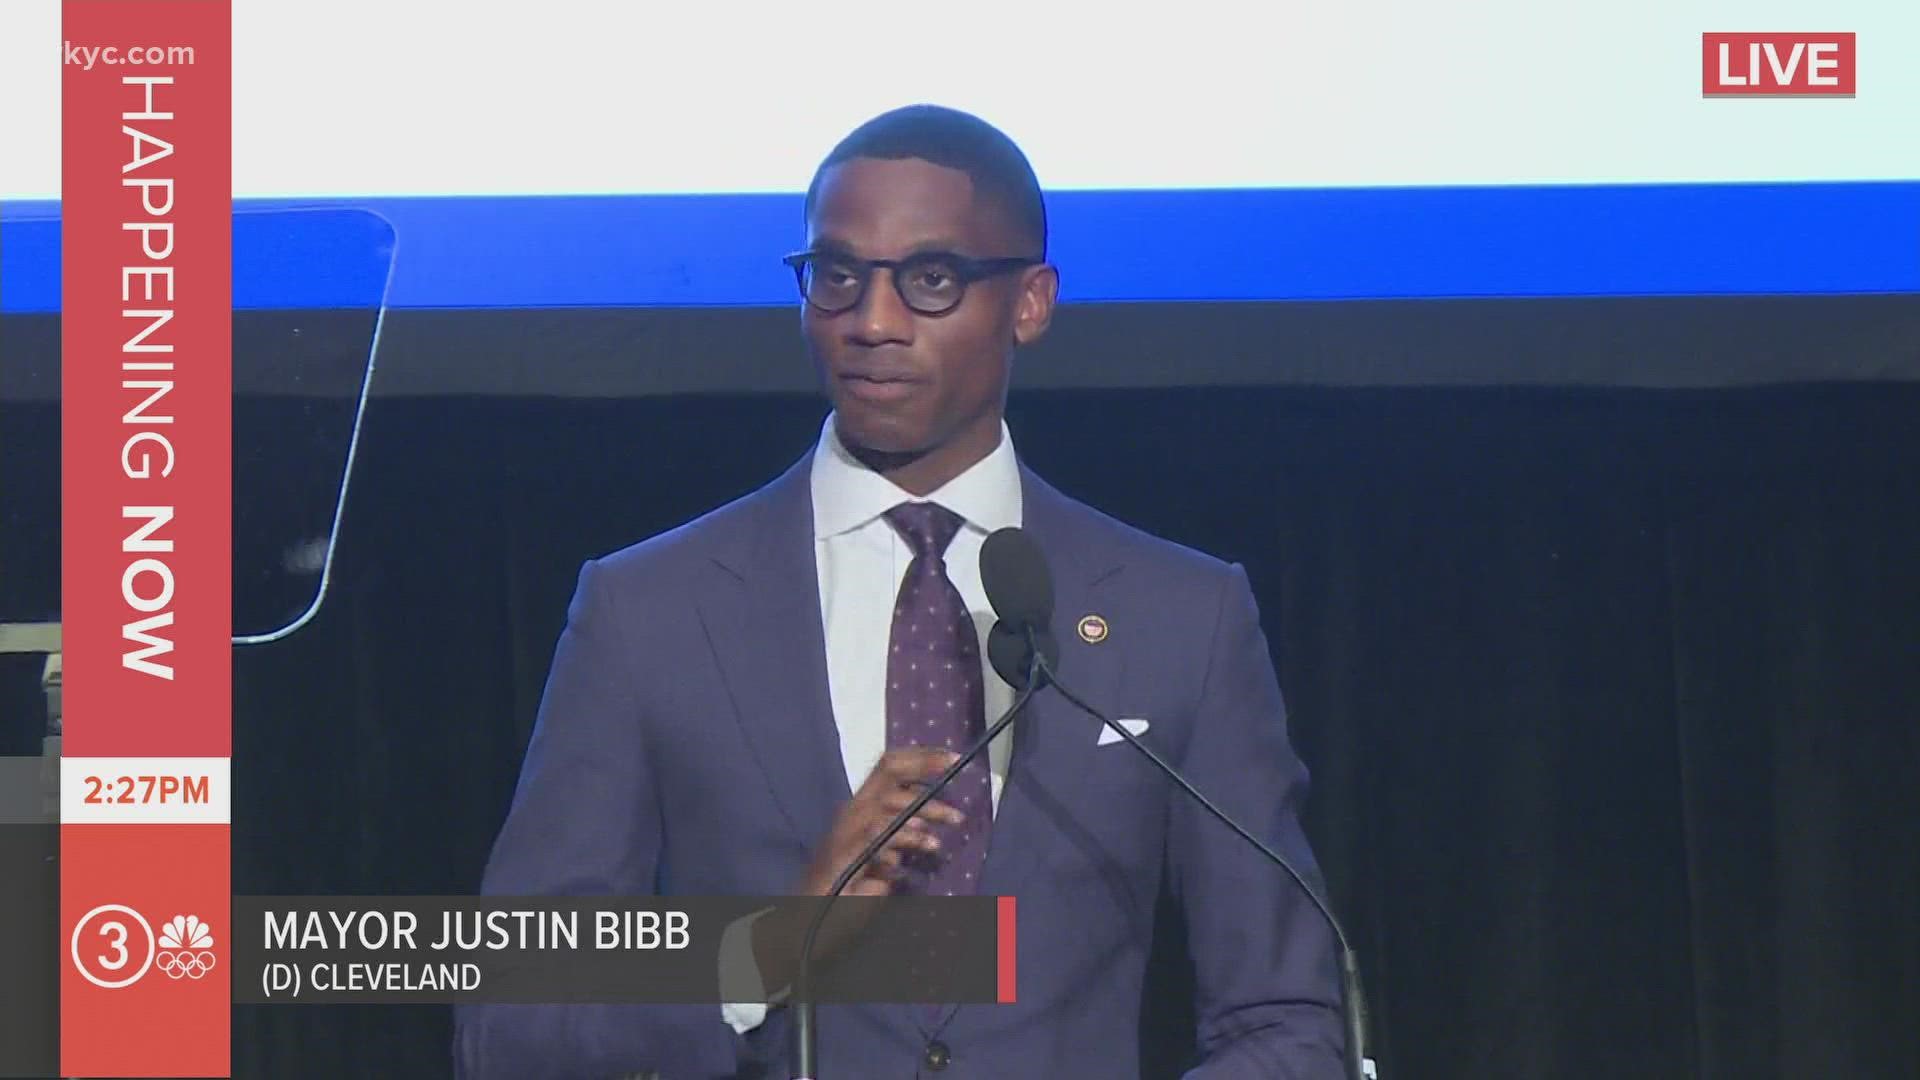 You can watch the ceremonial swearing-in of Justin Bibb in the player above.